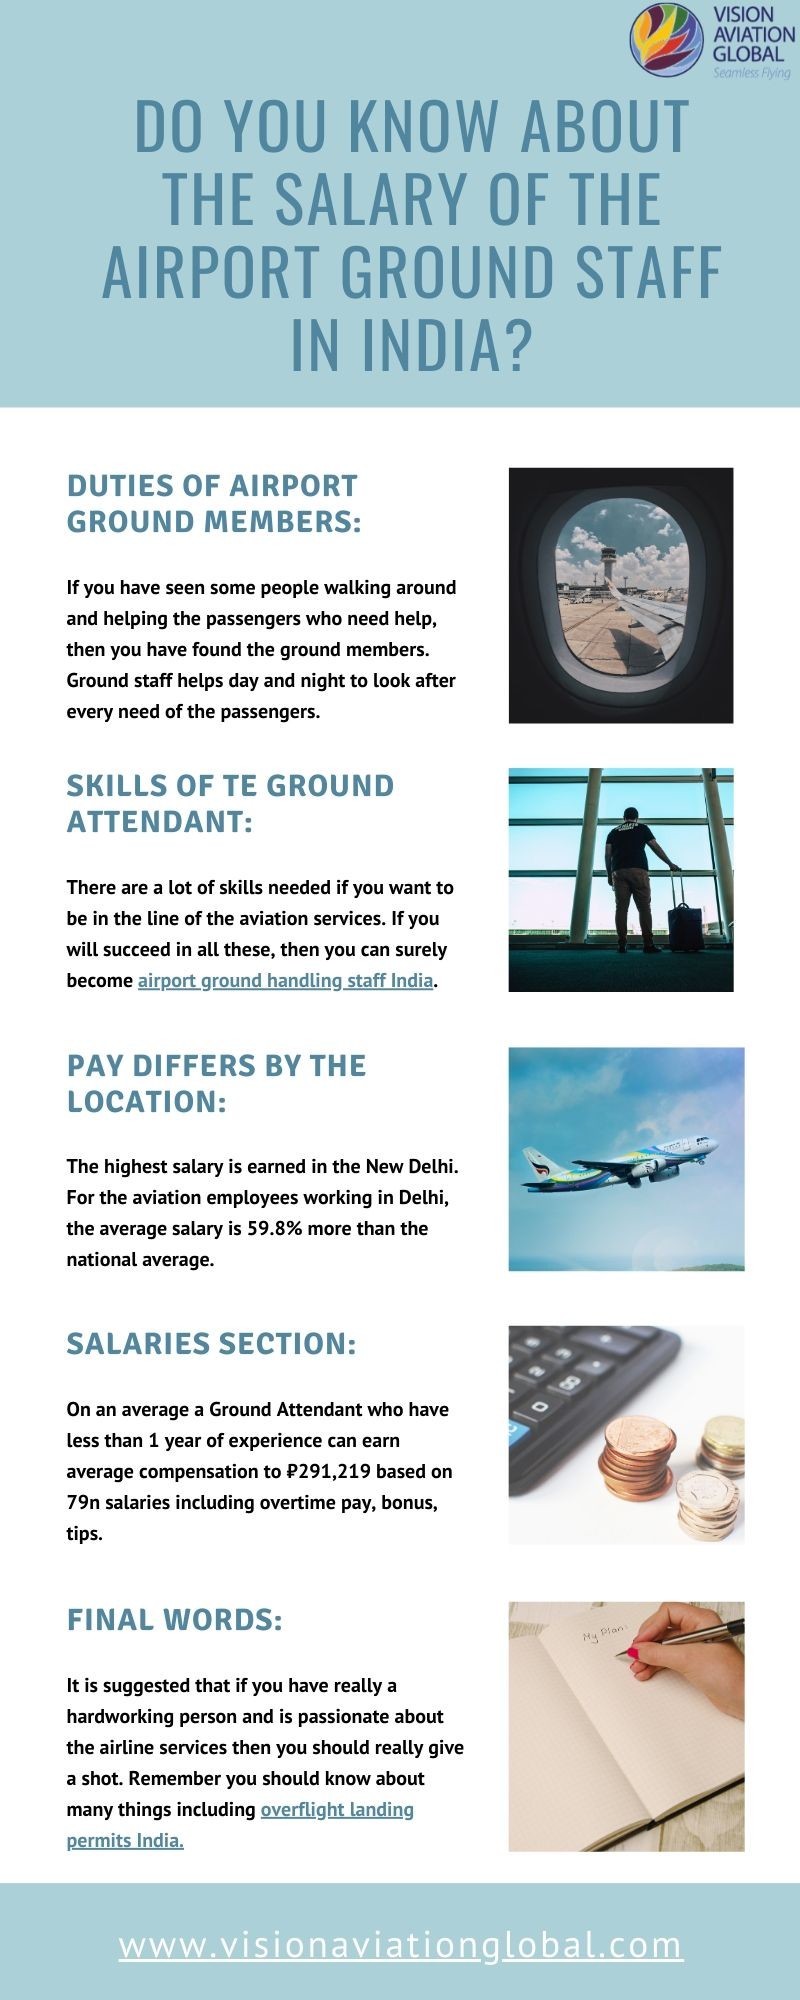 Do you know about the salary of the airport ground staff in India